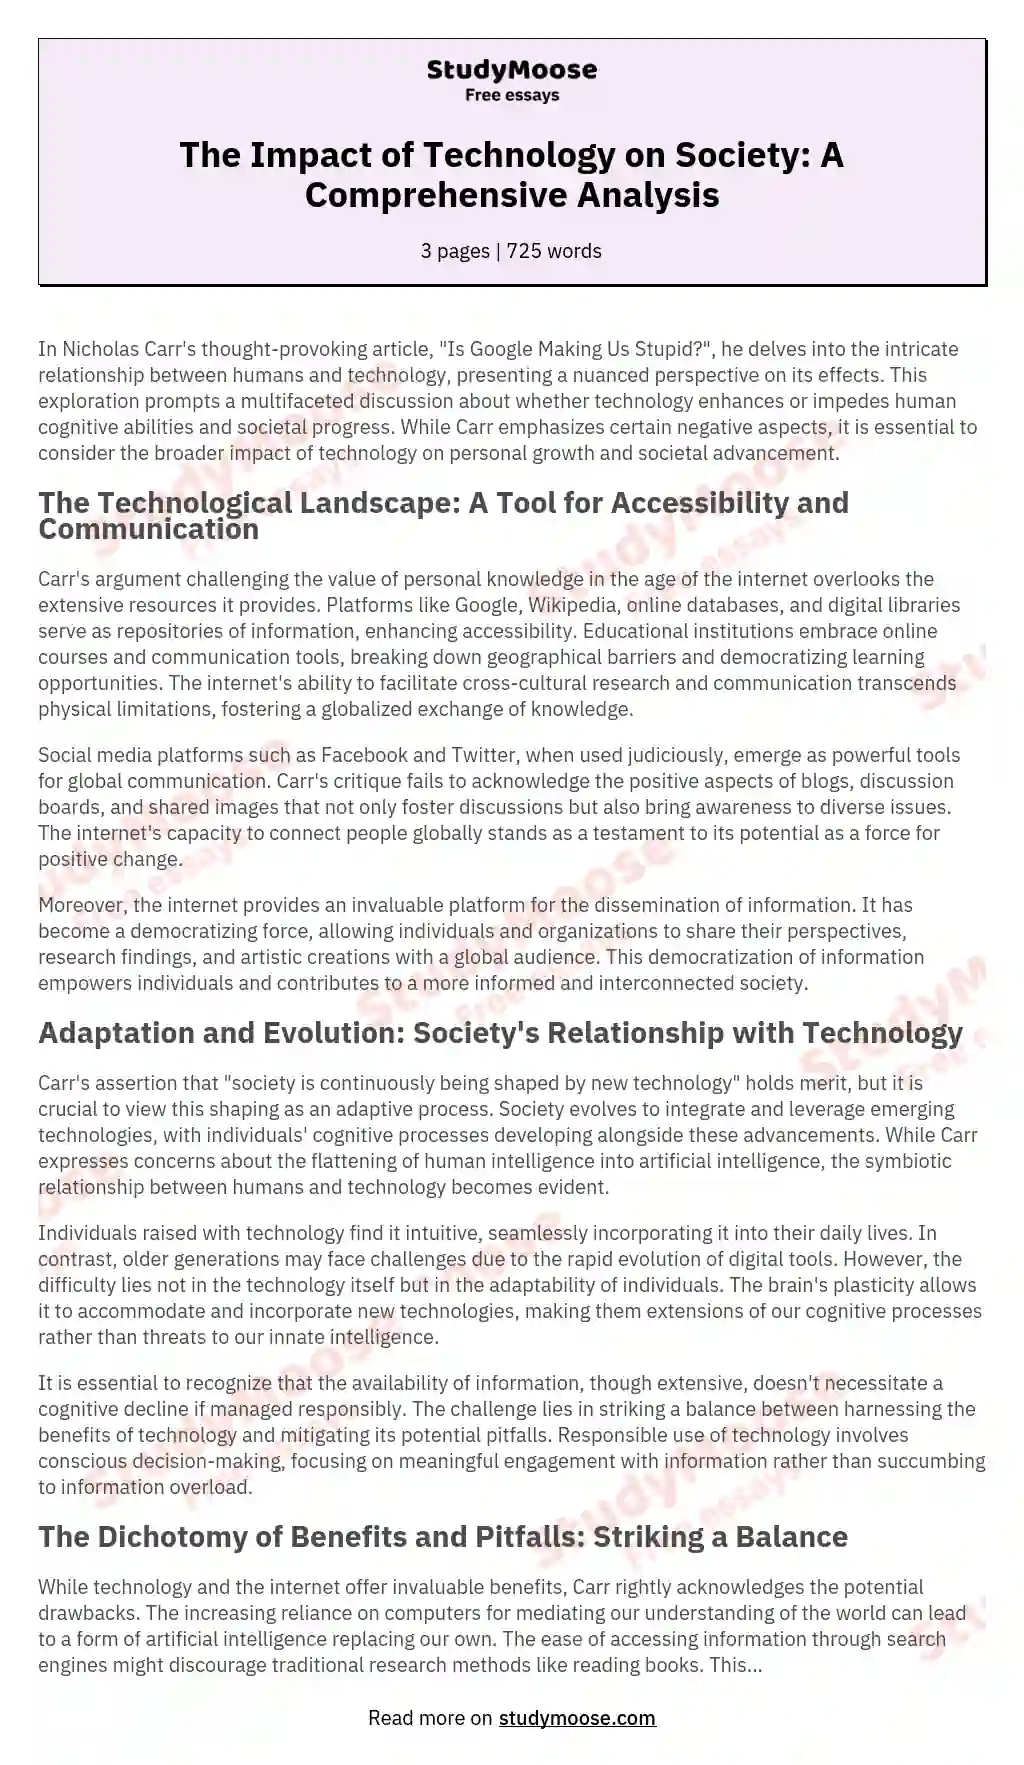 The Impact of Technology on Society: A Comprehensive Analysis essay